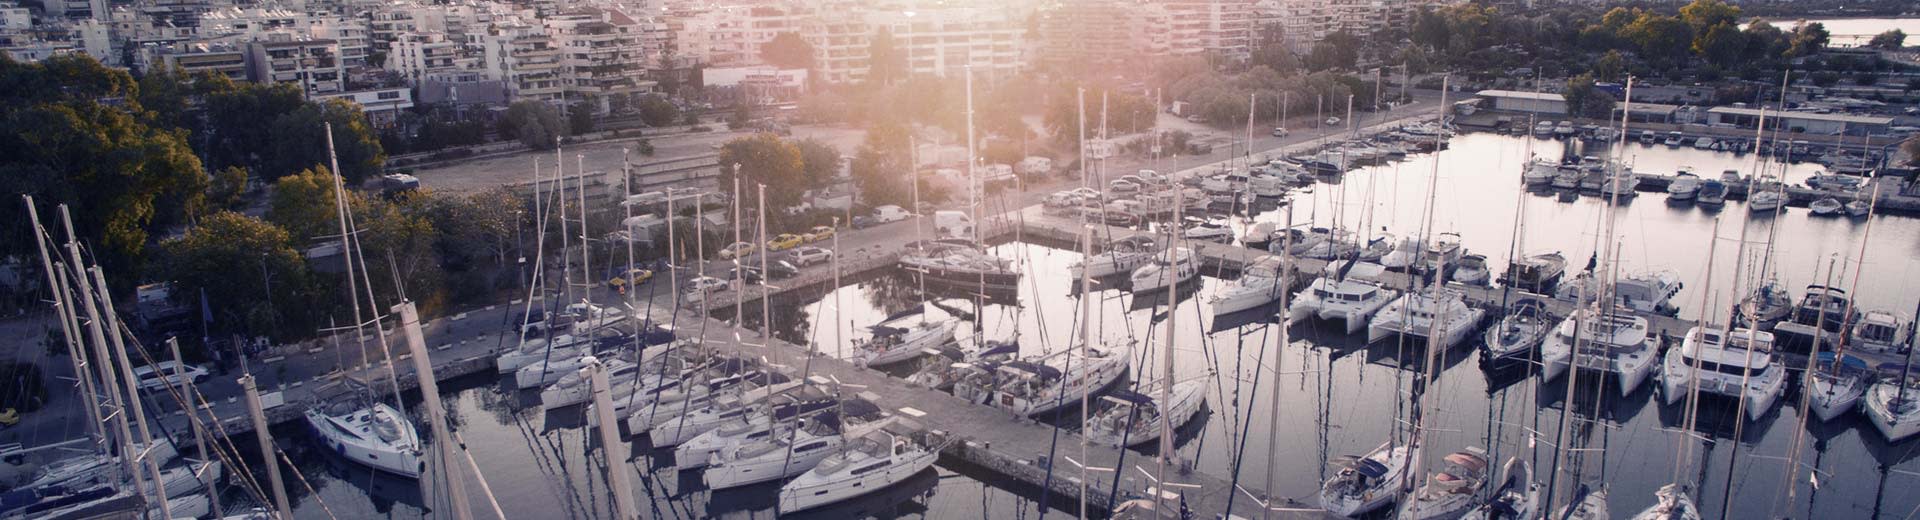 On a harbour in Piraeus, a number of private yachts lie in wait on a hot and clear day.